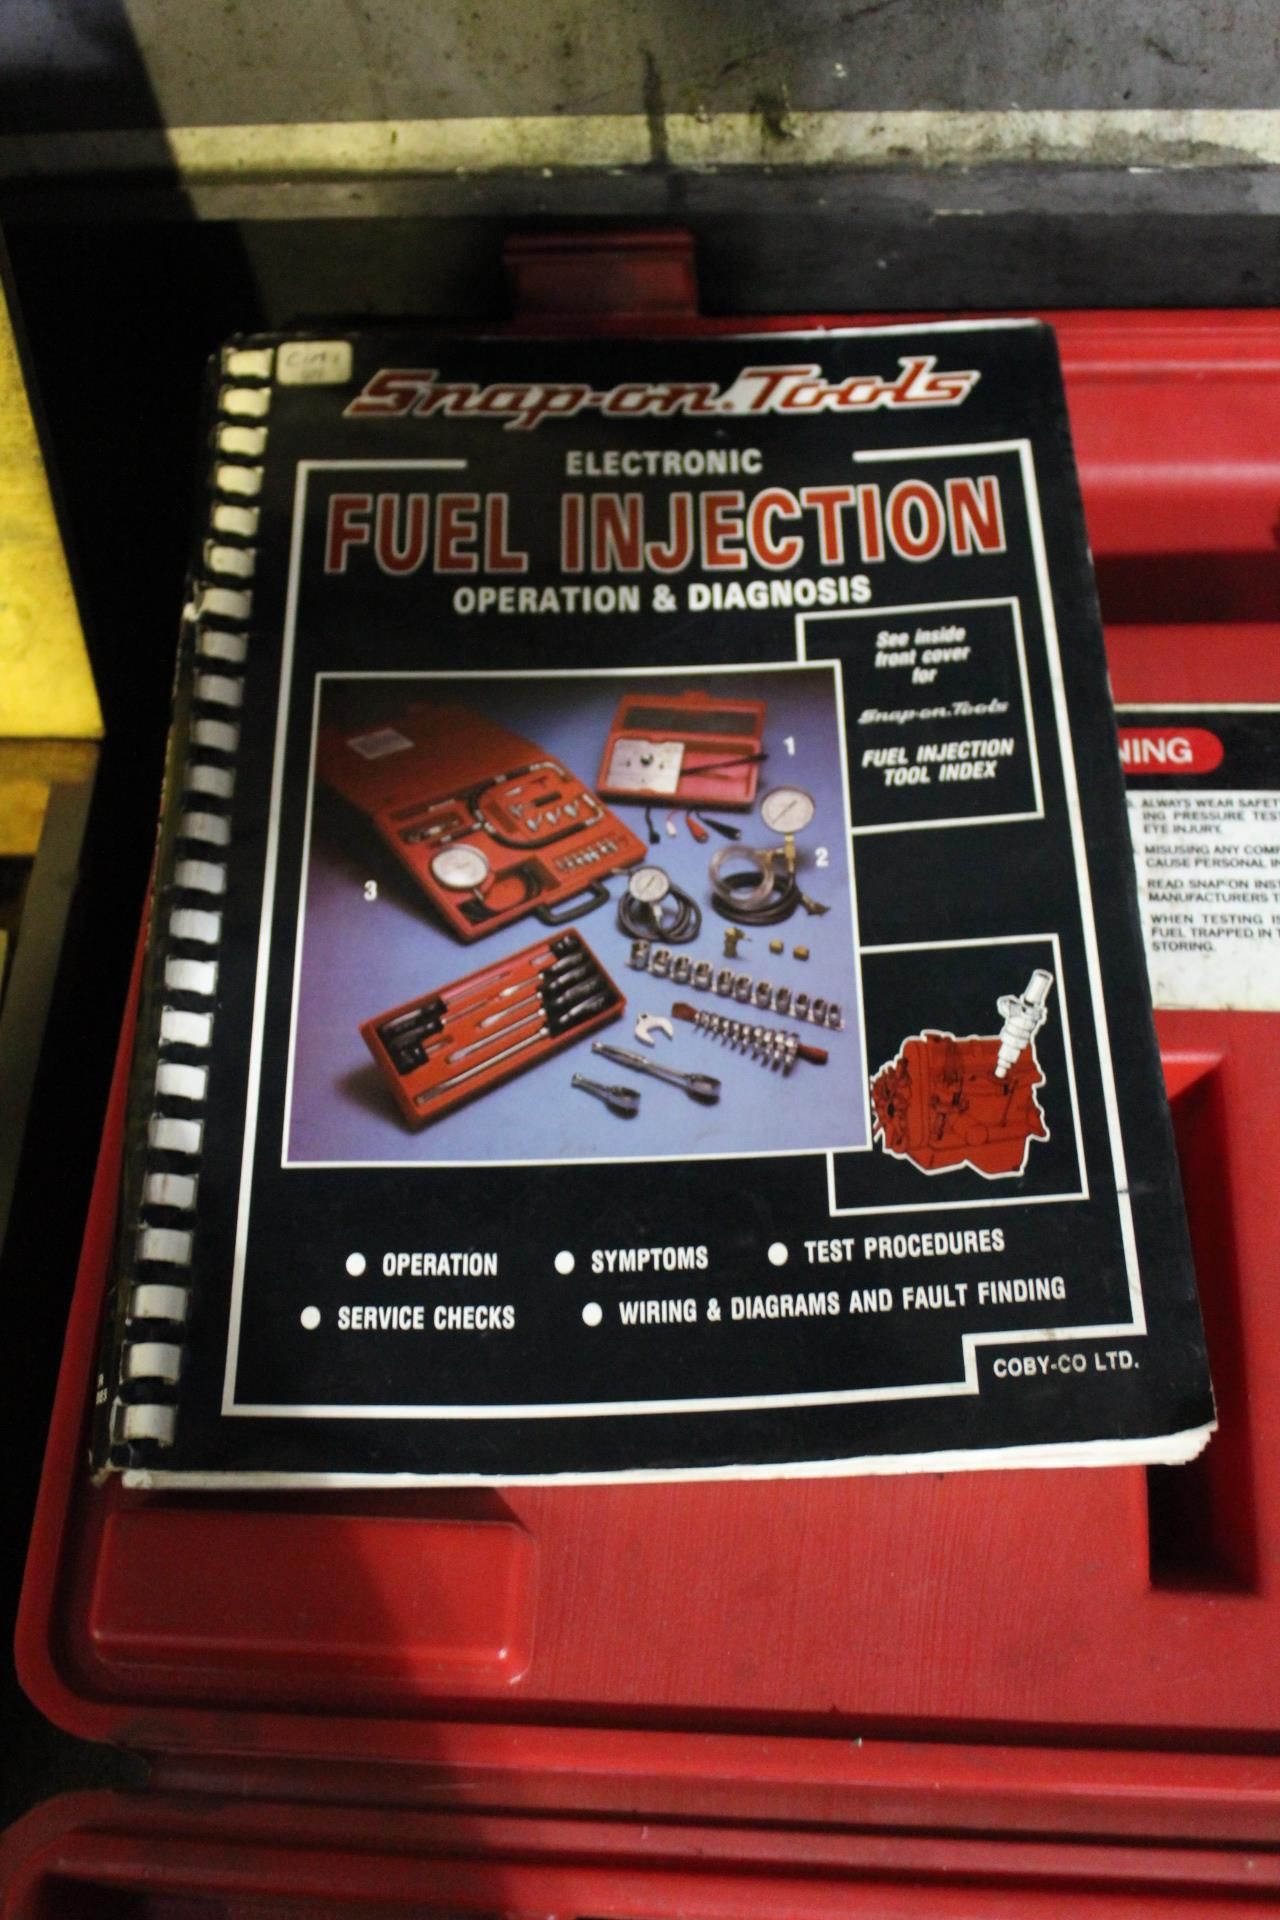 Snap-on Fuel Injection Kits (lot located at Border - Image 2 of 2